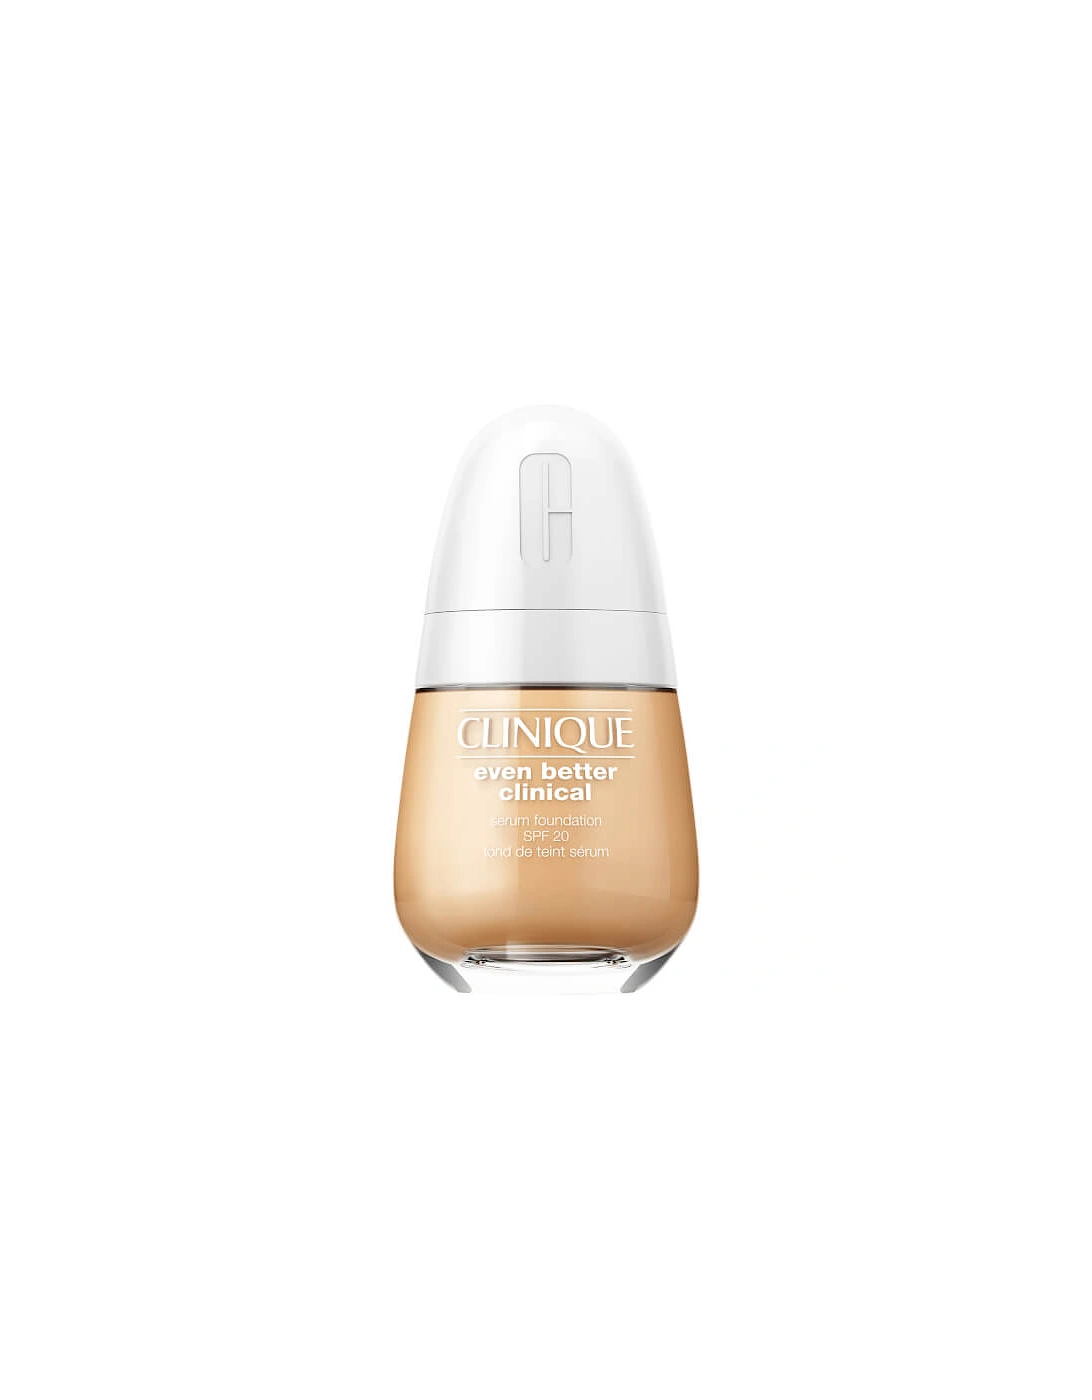 Even Better Clinical Serum Foundation SPF20 - Toasted Wheat - Clinique, 2 of 1